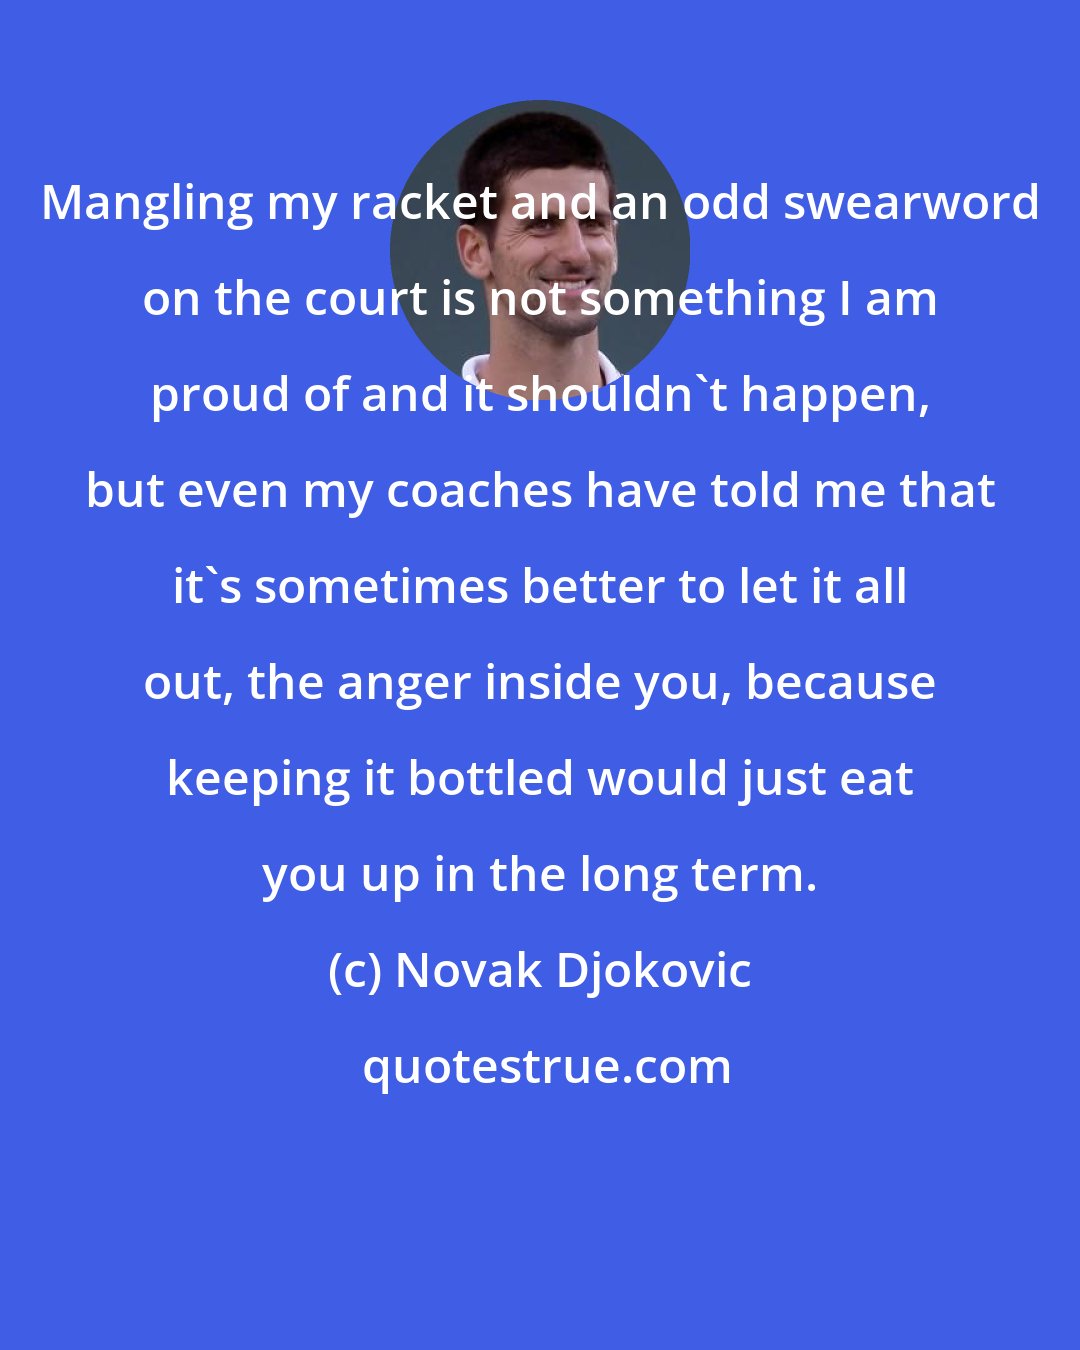 Novak Djokovic: Mangling my racket and an odd swearword on the court is not something I am proud of and it shouldn't happen, but even my coaches have told me that it's sometimes better to let it all out, the anger inside you, because keeping it bottled would just eat you up in the long term.